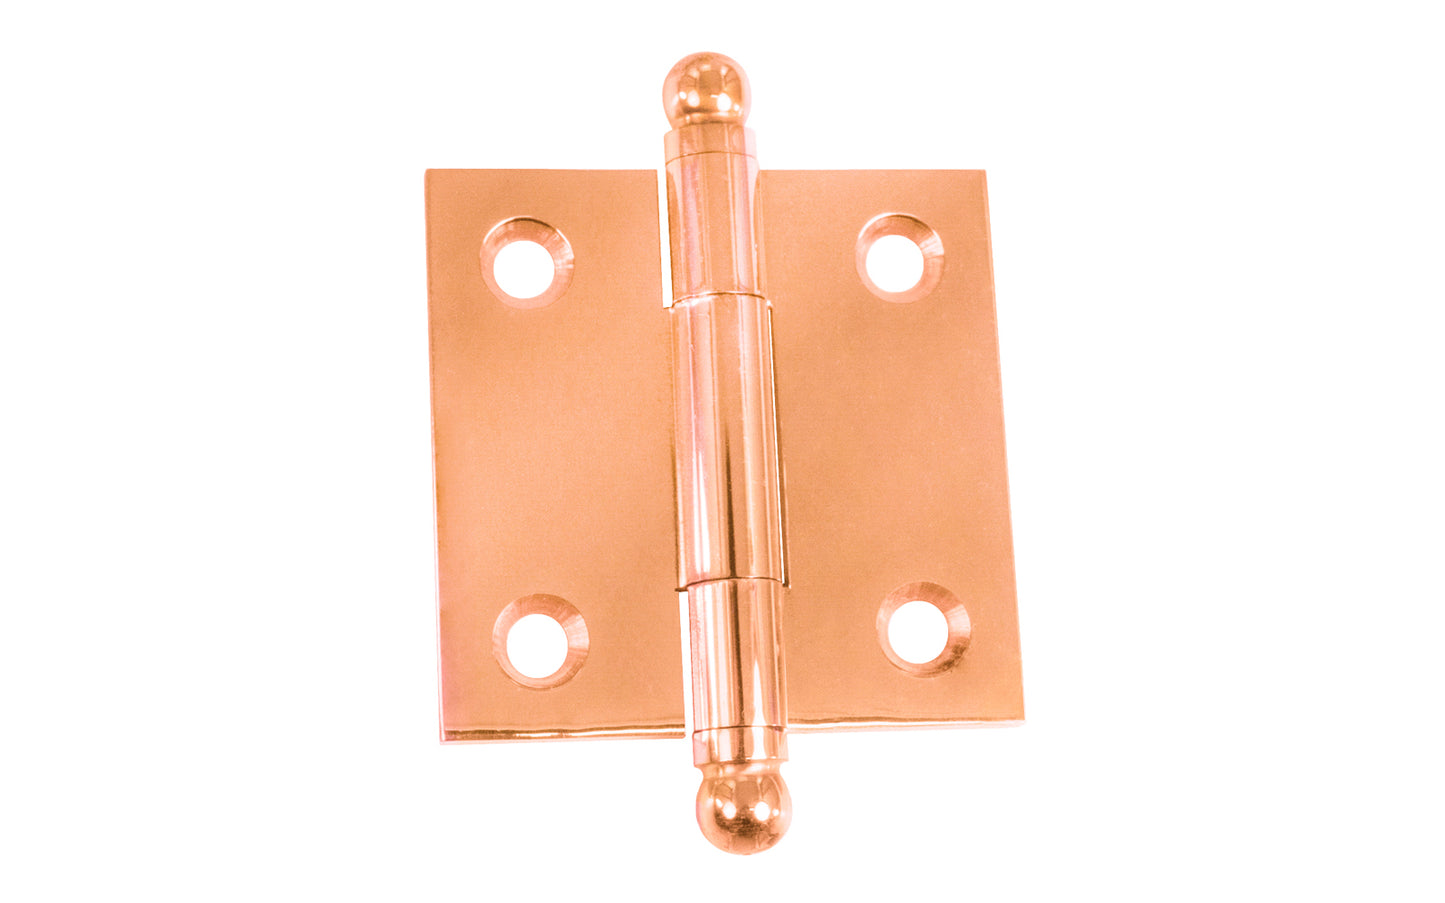 Classic Solid Brass Ball-Tip Cabinet Hinge ~ 1-1/2" x 1-1/2". Full mortise extruded hinges. 3/32" heavy duty leaf thickness gauge. Non-removable fixed hinge pin with ball tips. High quality thick cabinet hinge with ball tips. Polished Copper finish.